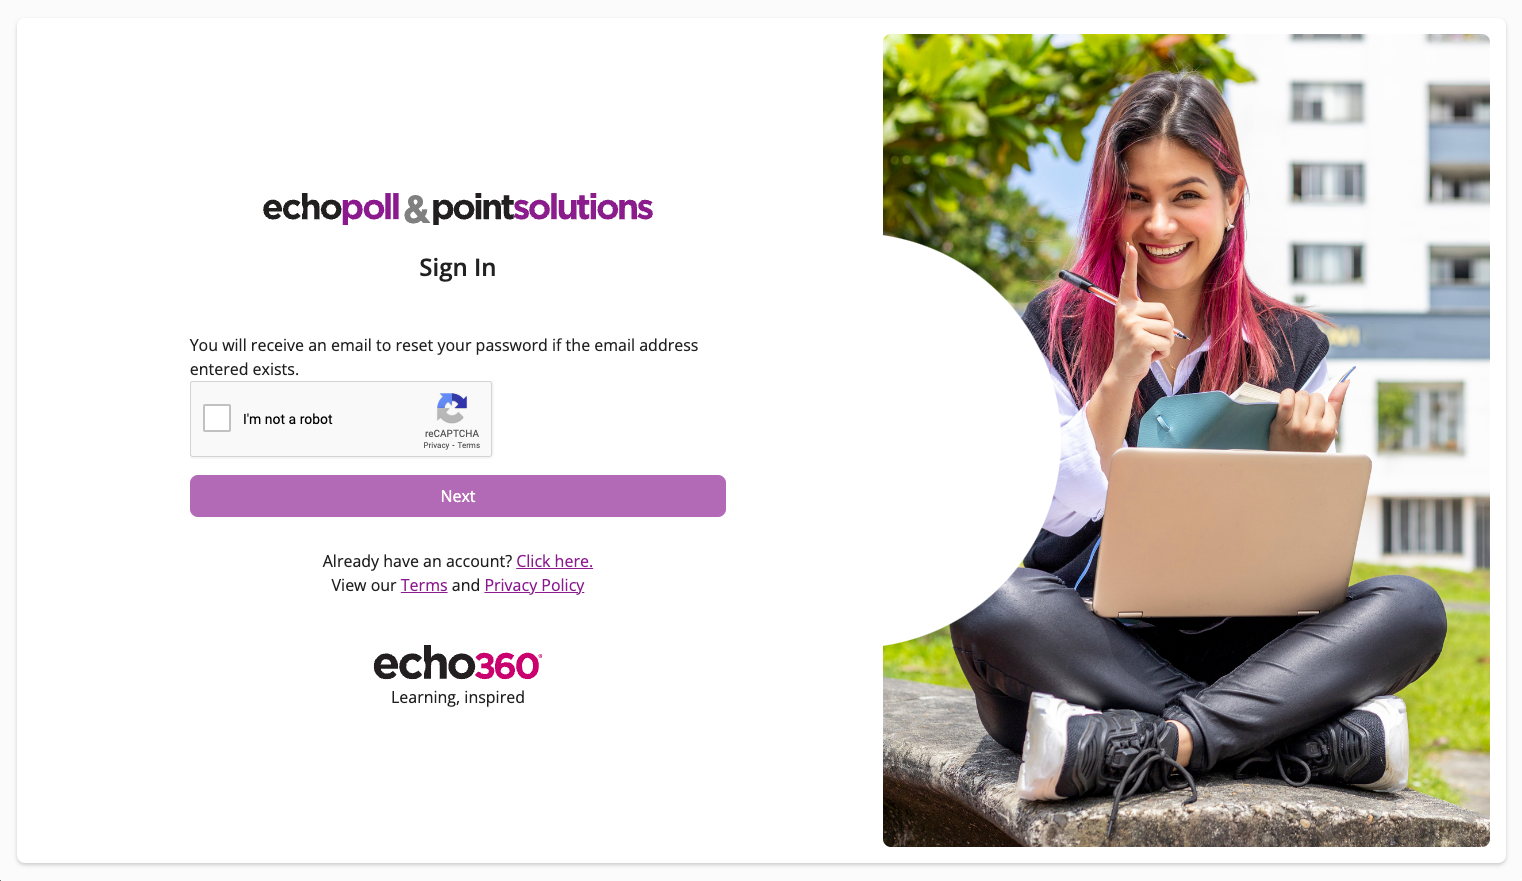 The EchoPoll and PointSolutions log-in screen with the forgot password reCAPTCHA shown